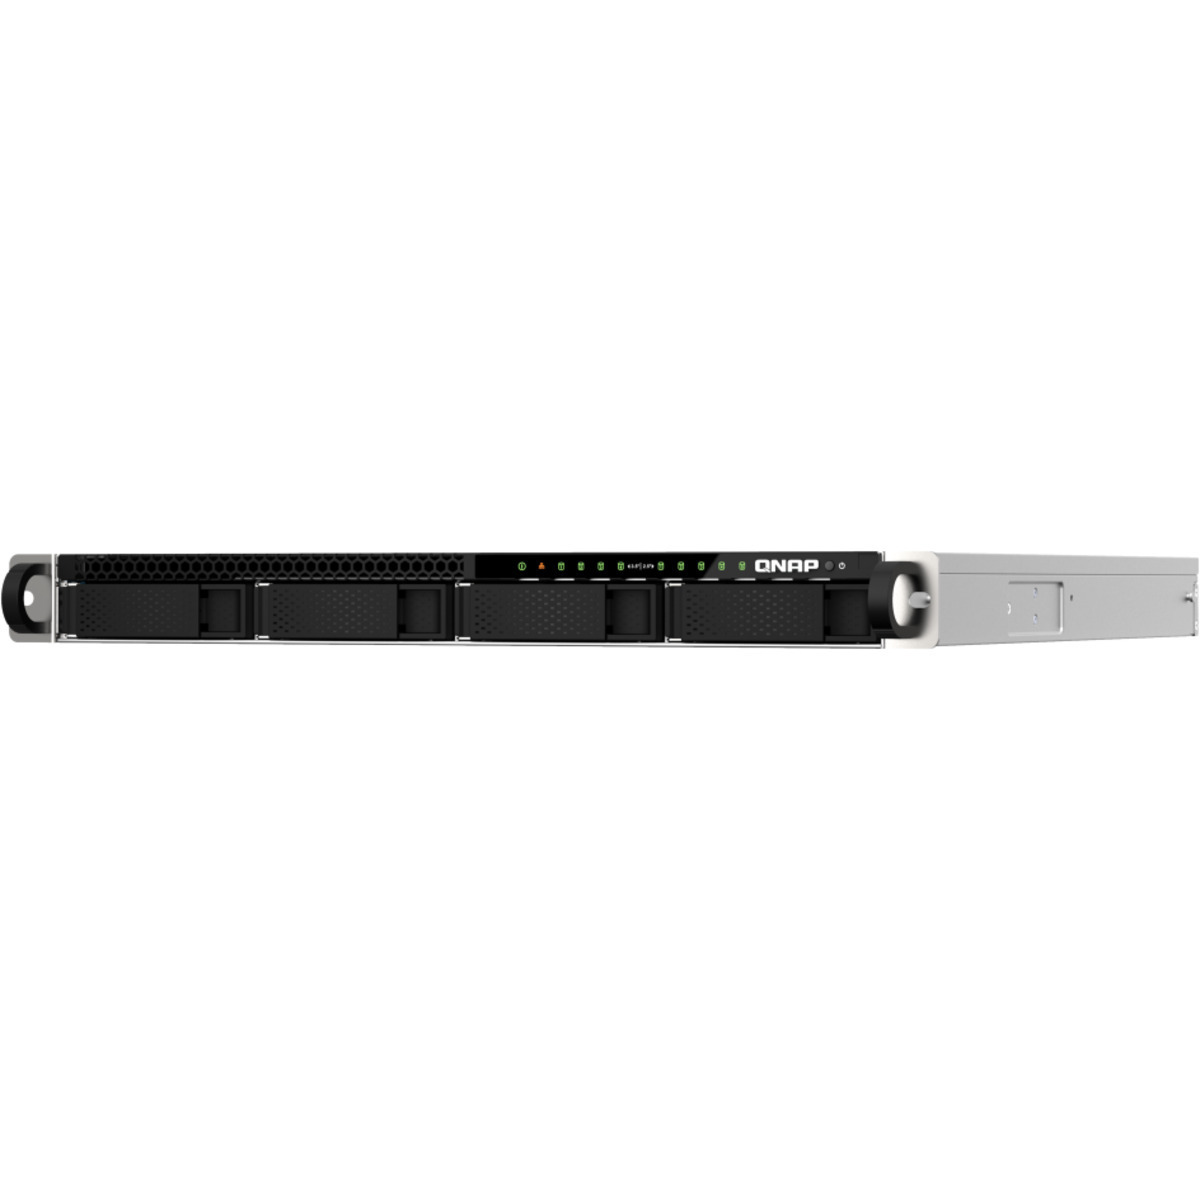 QNAP TS-h987XU-RP QuTS hero Edition 64tb 4-Bay RackMount Large Business / Enterprise NAS - Network Attached Storage Device 4x16tb TeamGroup EX2 Elite T253E2016T0C101 2.5 550/520MB/s SATA 6Gb/s SSD CONSUMER Class Drives Installed - Burn-In Tested TS-h987XU-RP QuTS hero Edition